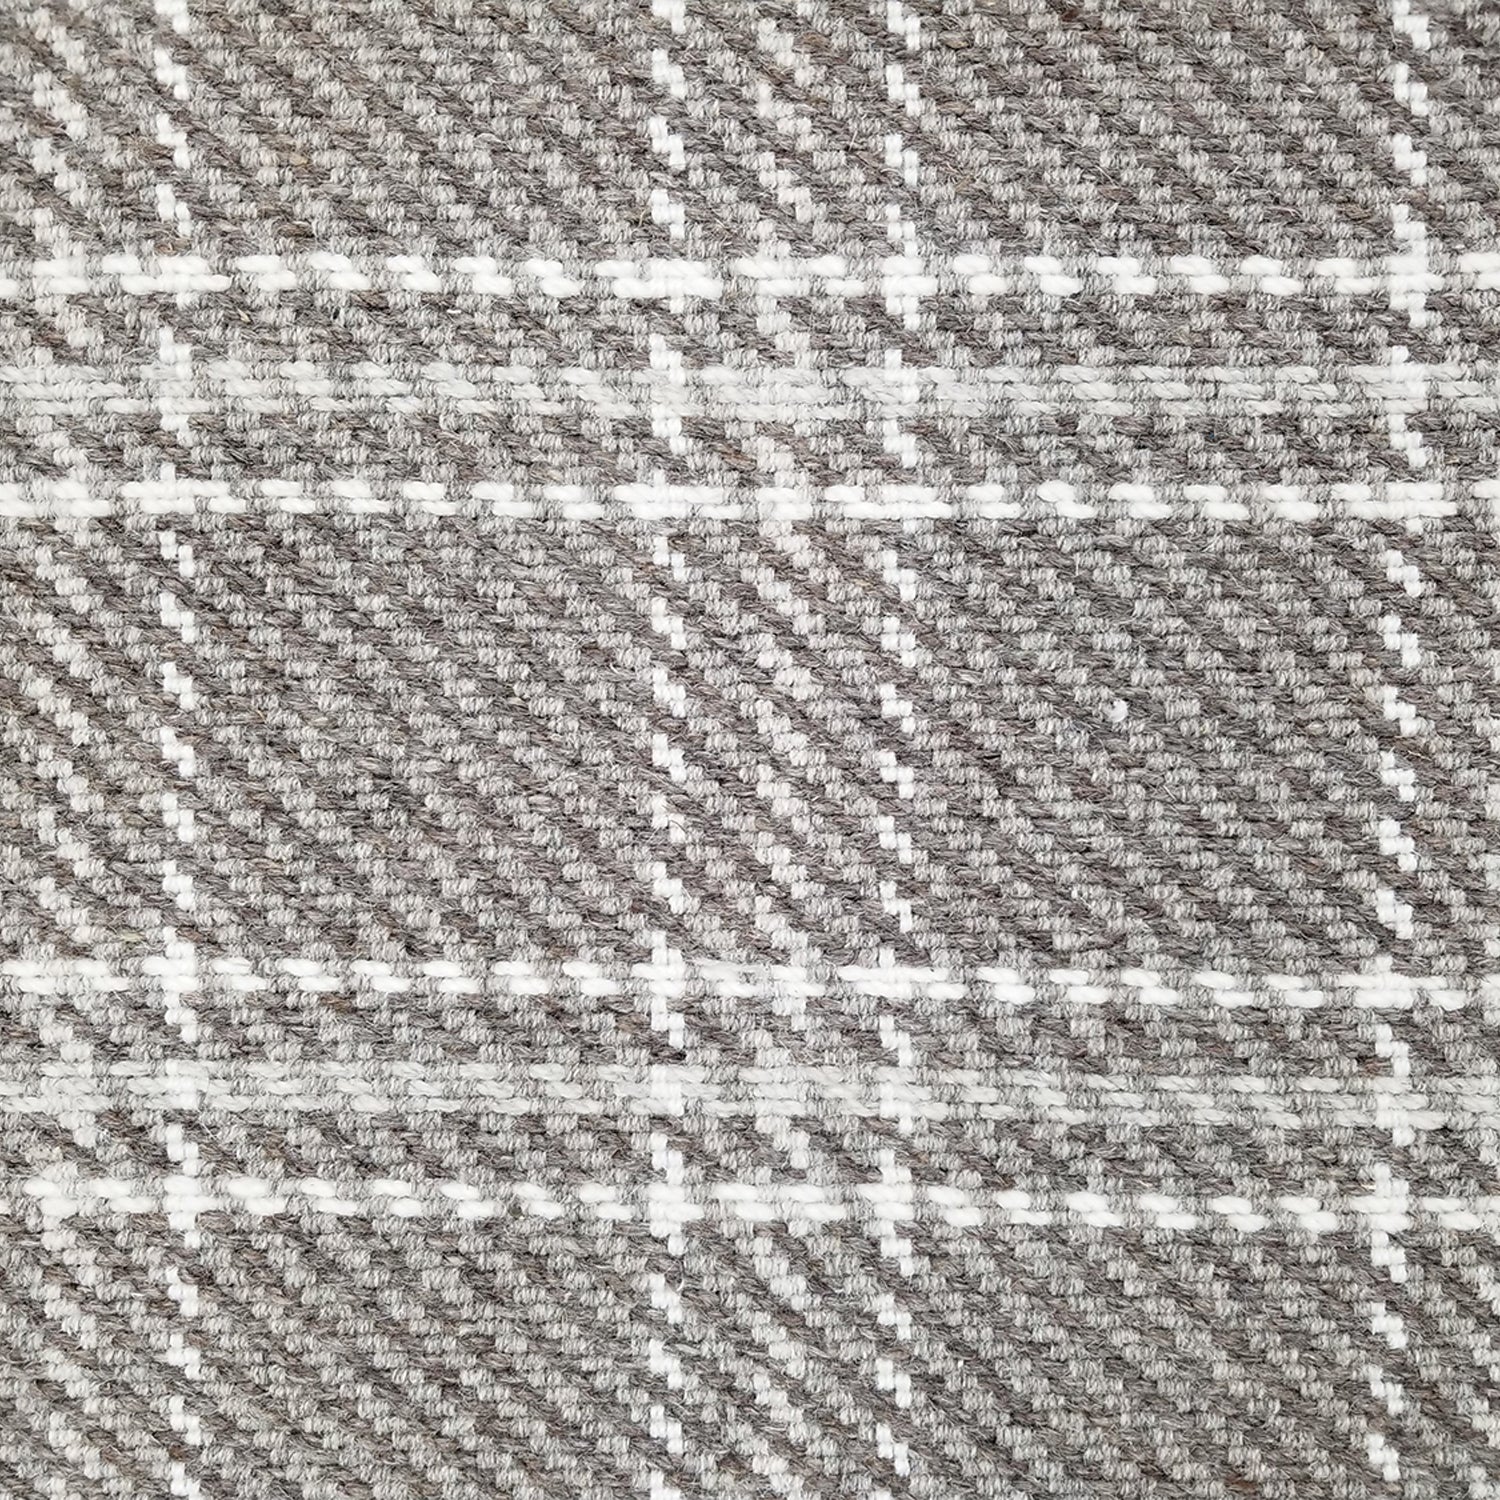 Wool broadloom carpet swatch in houndstooth plaid in shades of gray and cream.